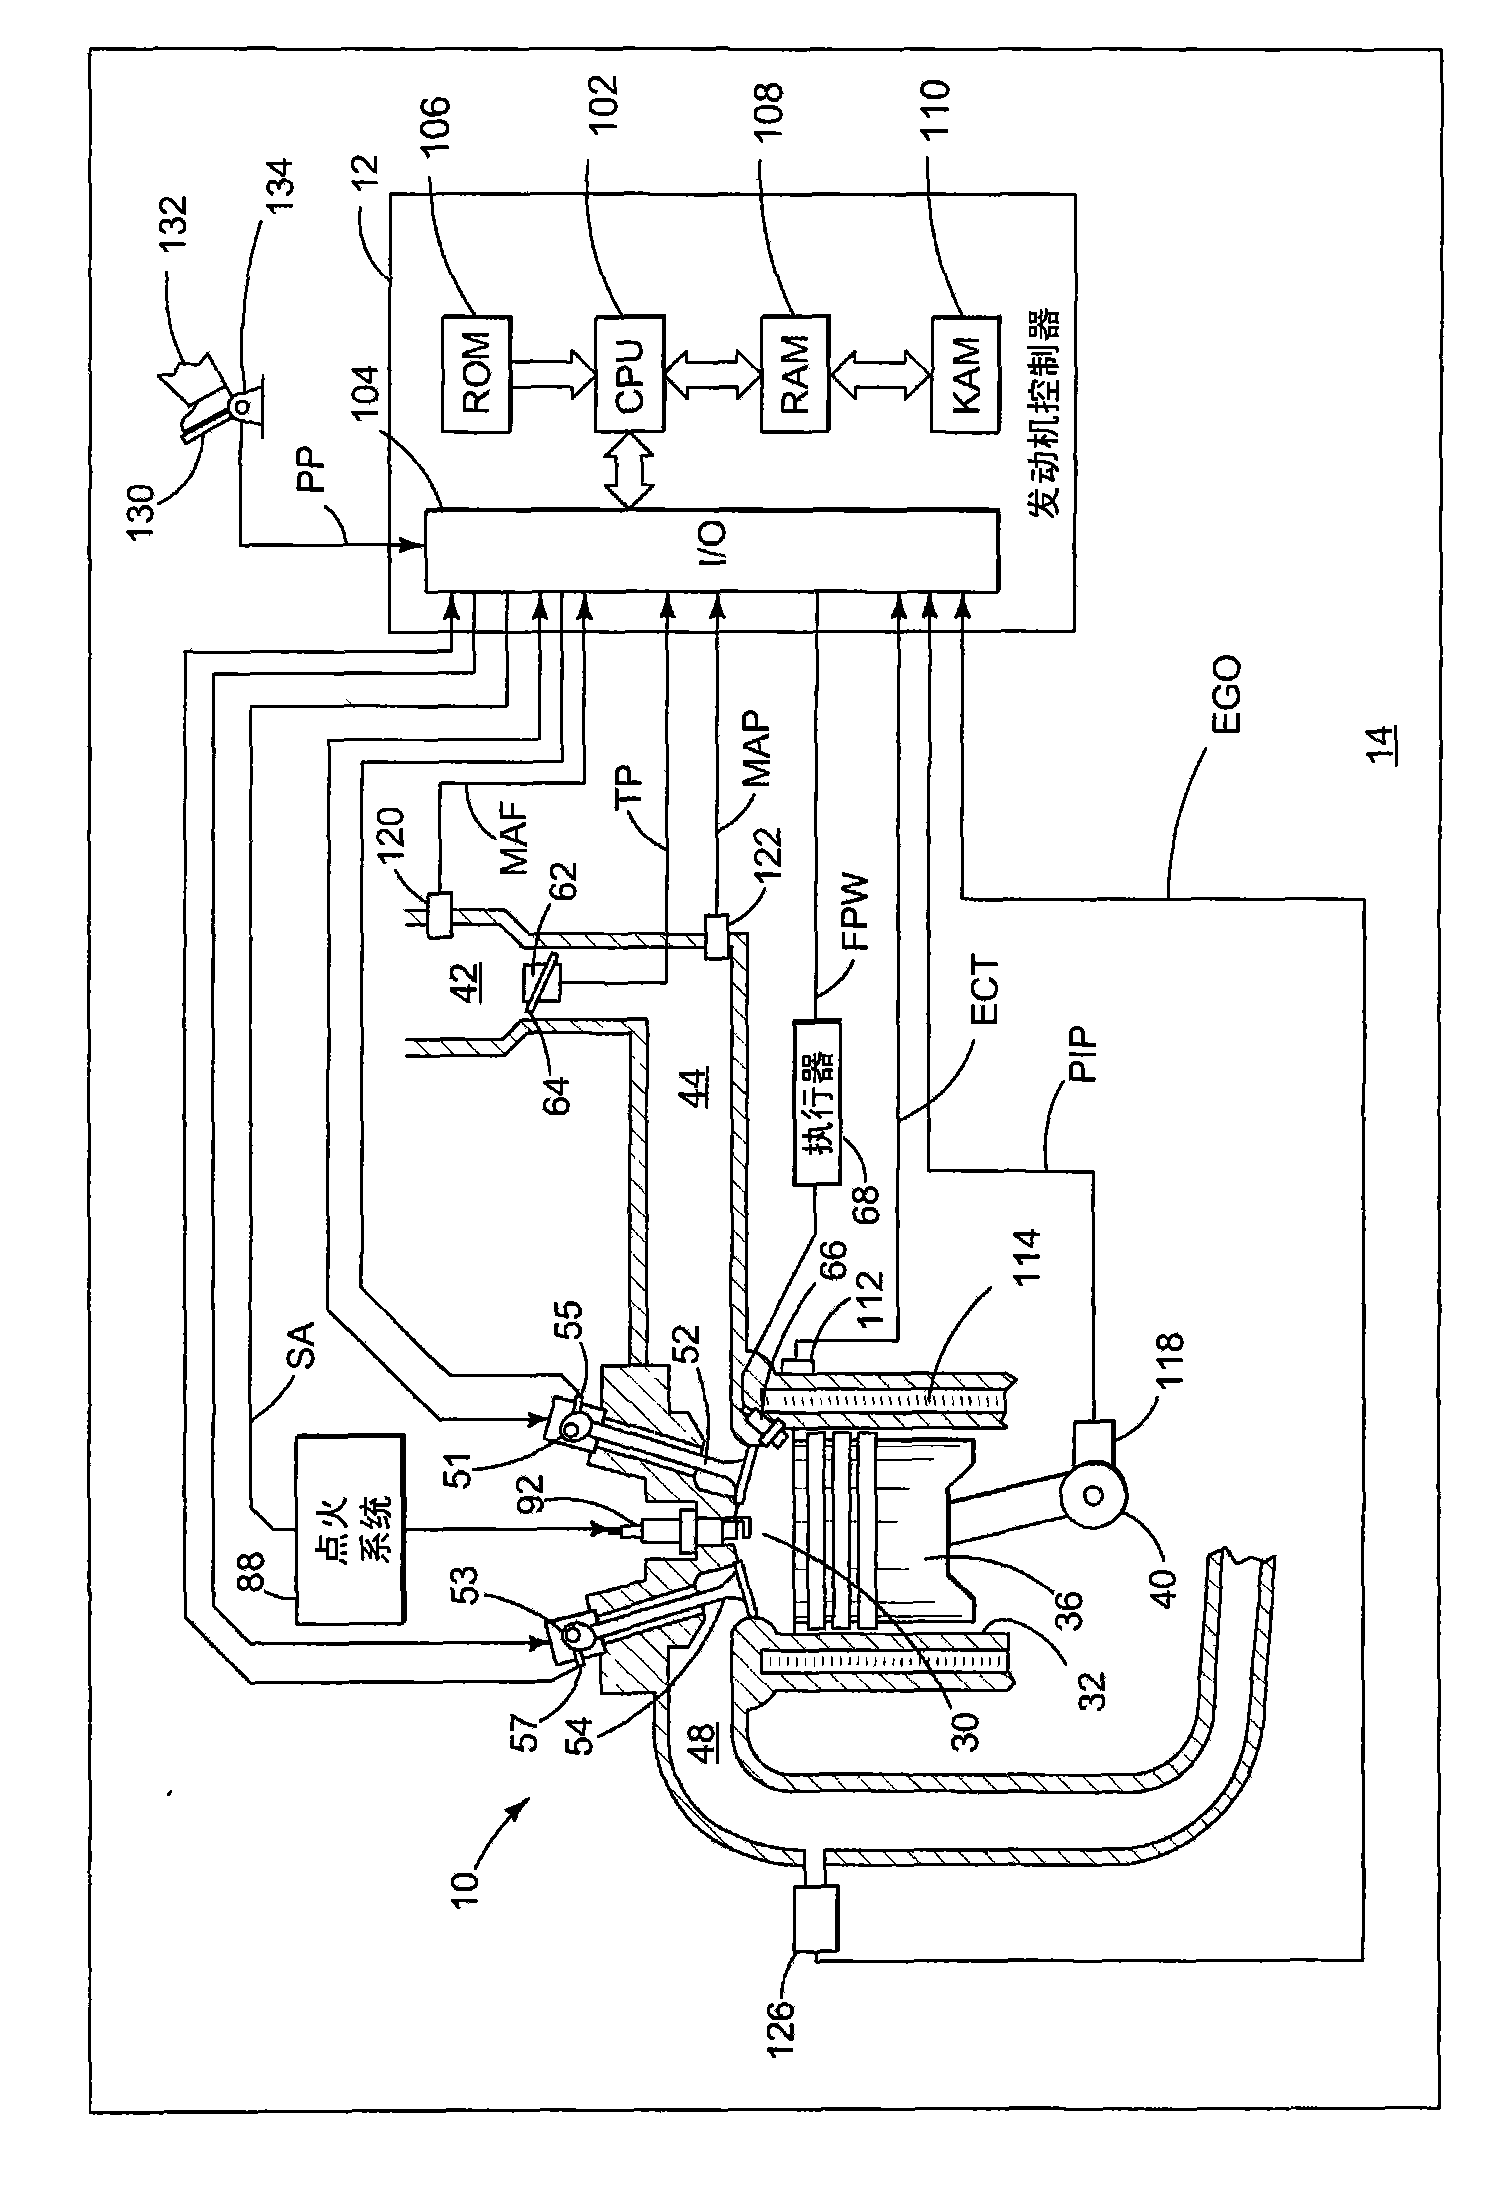 Stability control and inclined surface control using a common signal source